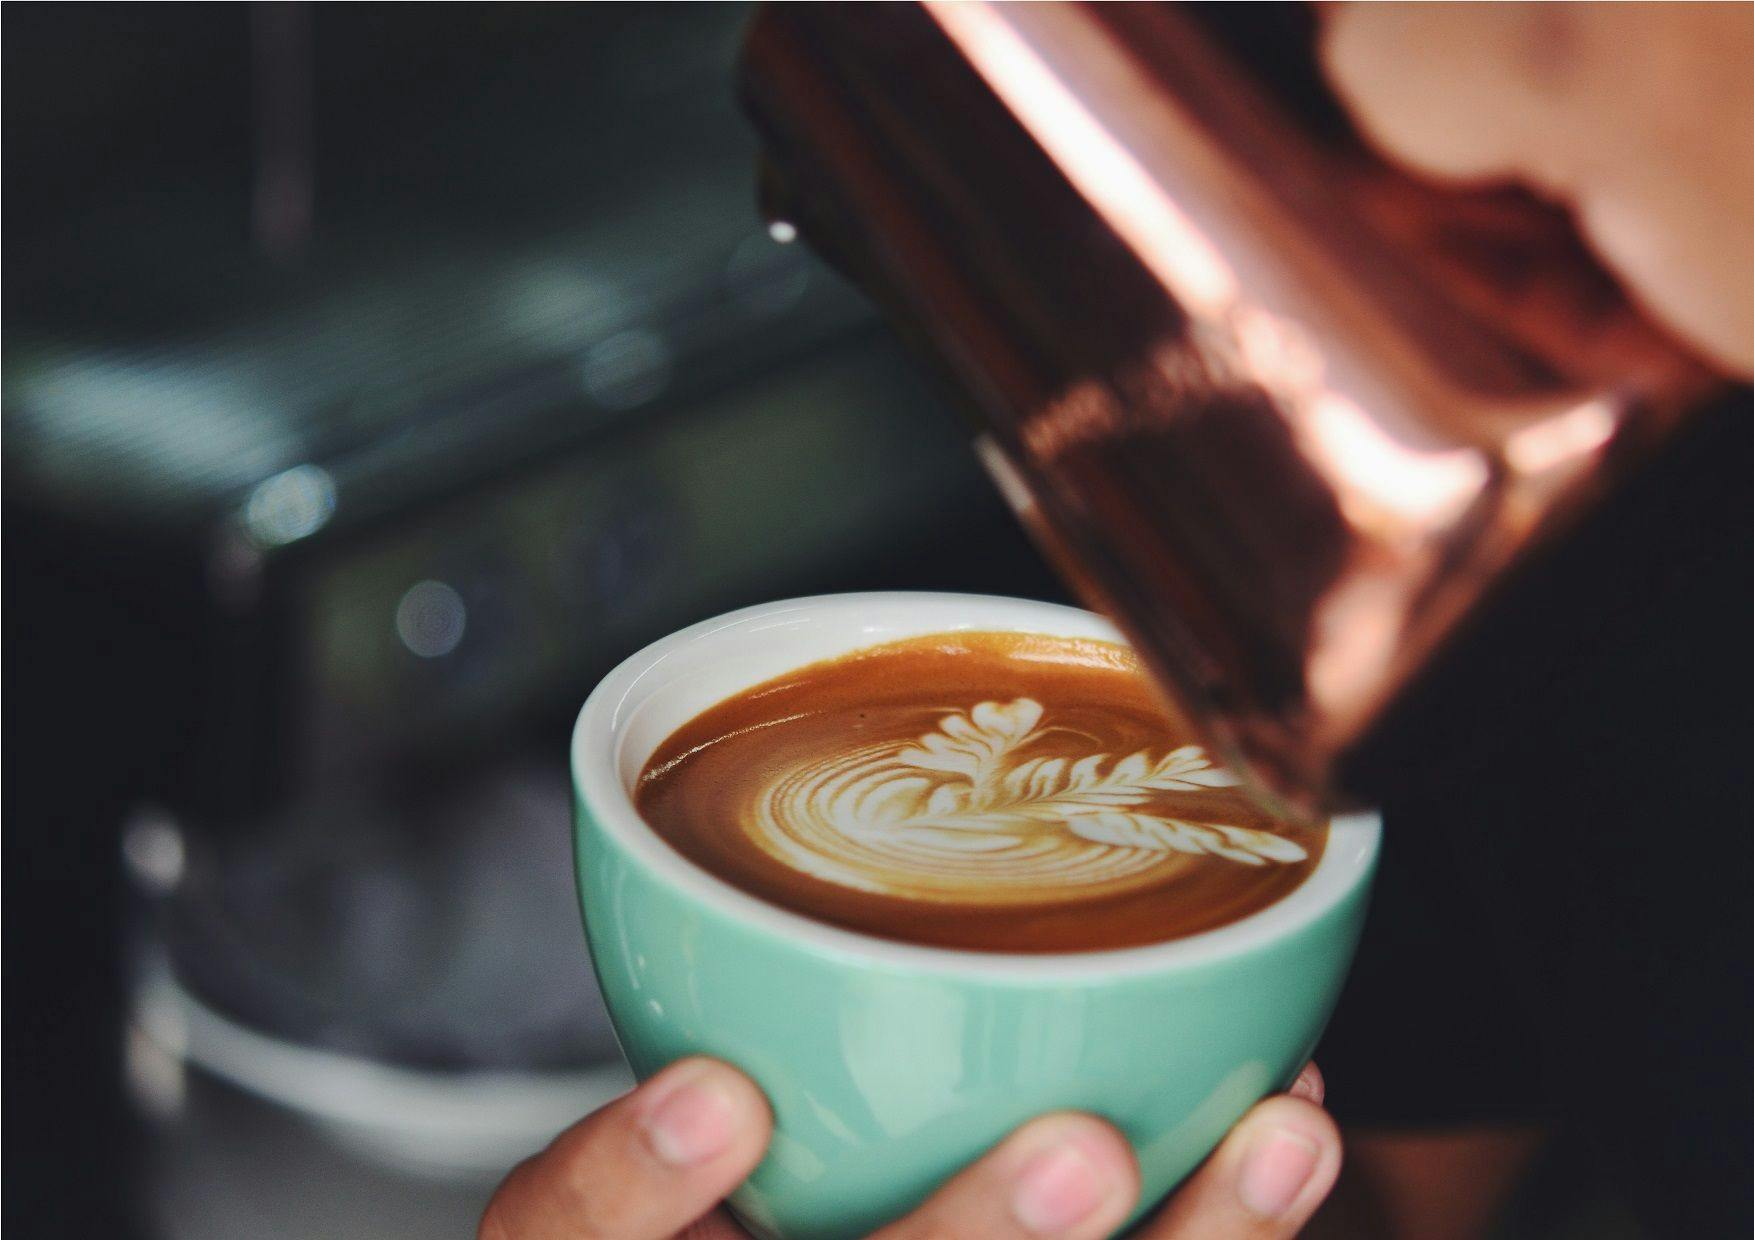 Non-dairy barista coffee improved with ChickP protein isolates, company says